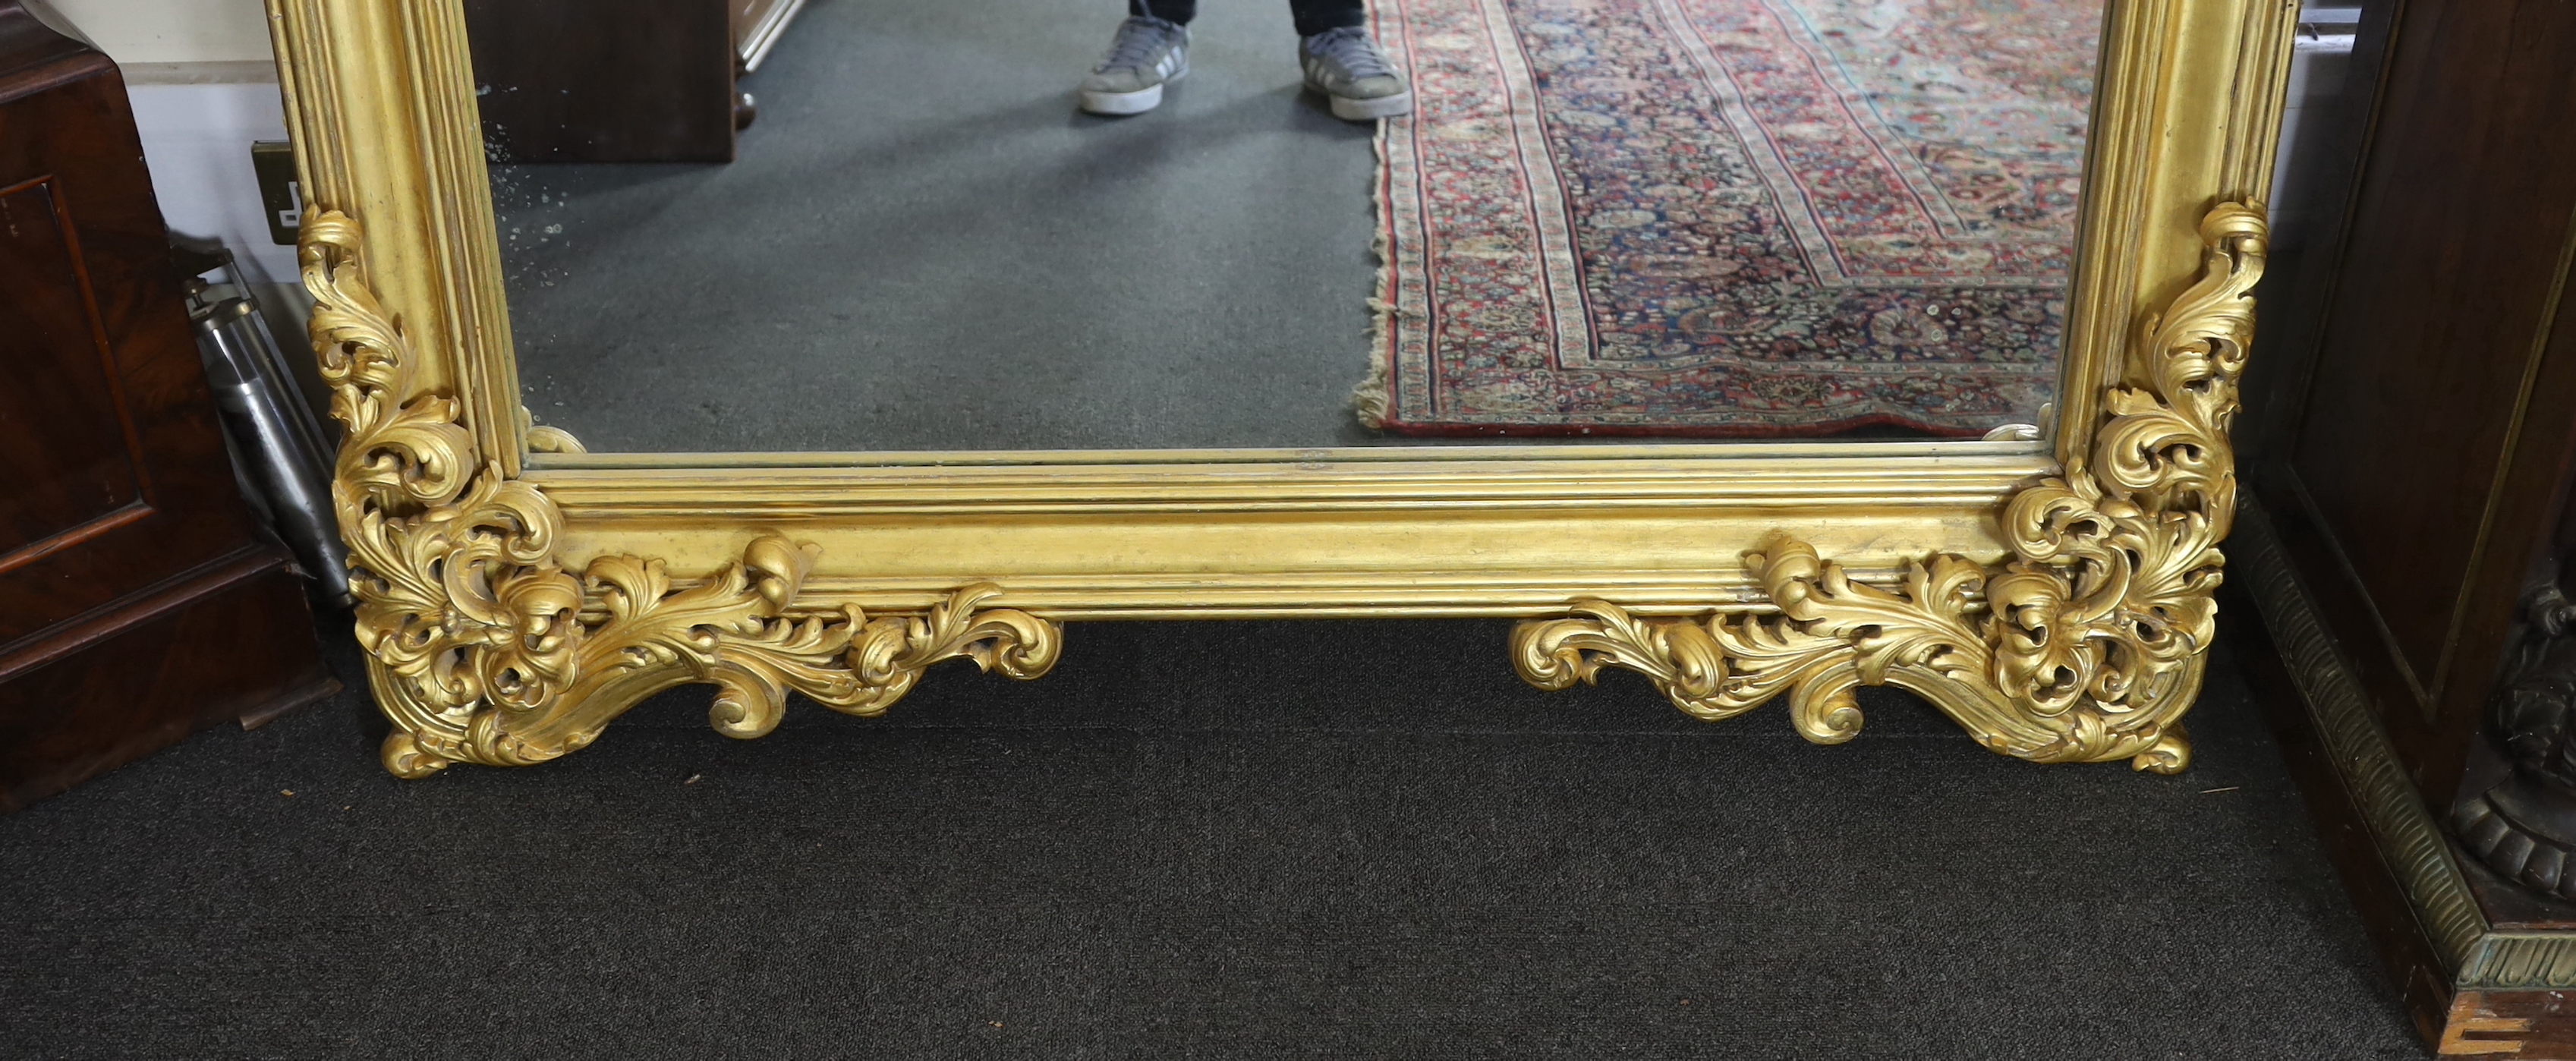 An ornate early 20th century carved giltwood wall mirror, width 146cm, height 250cm